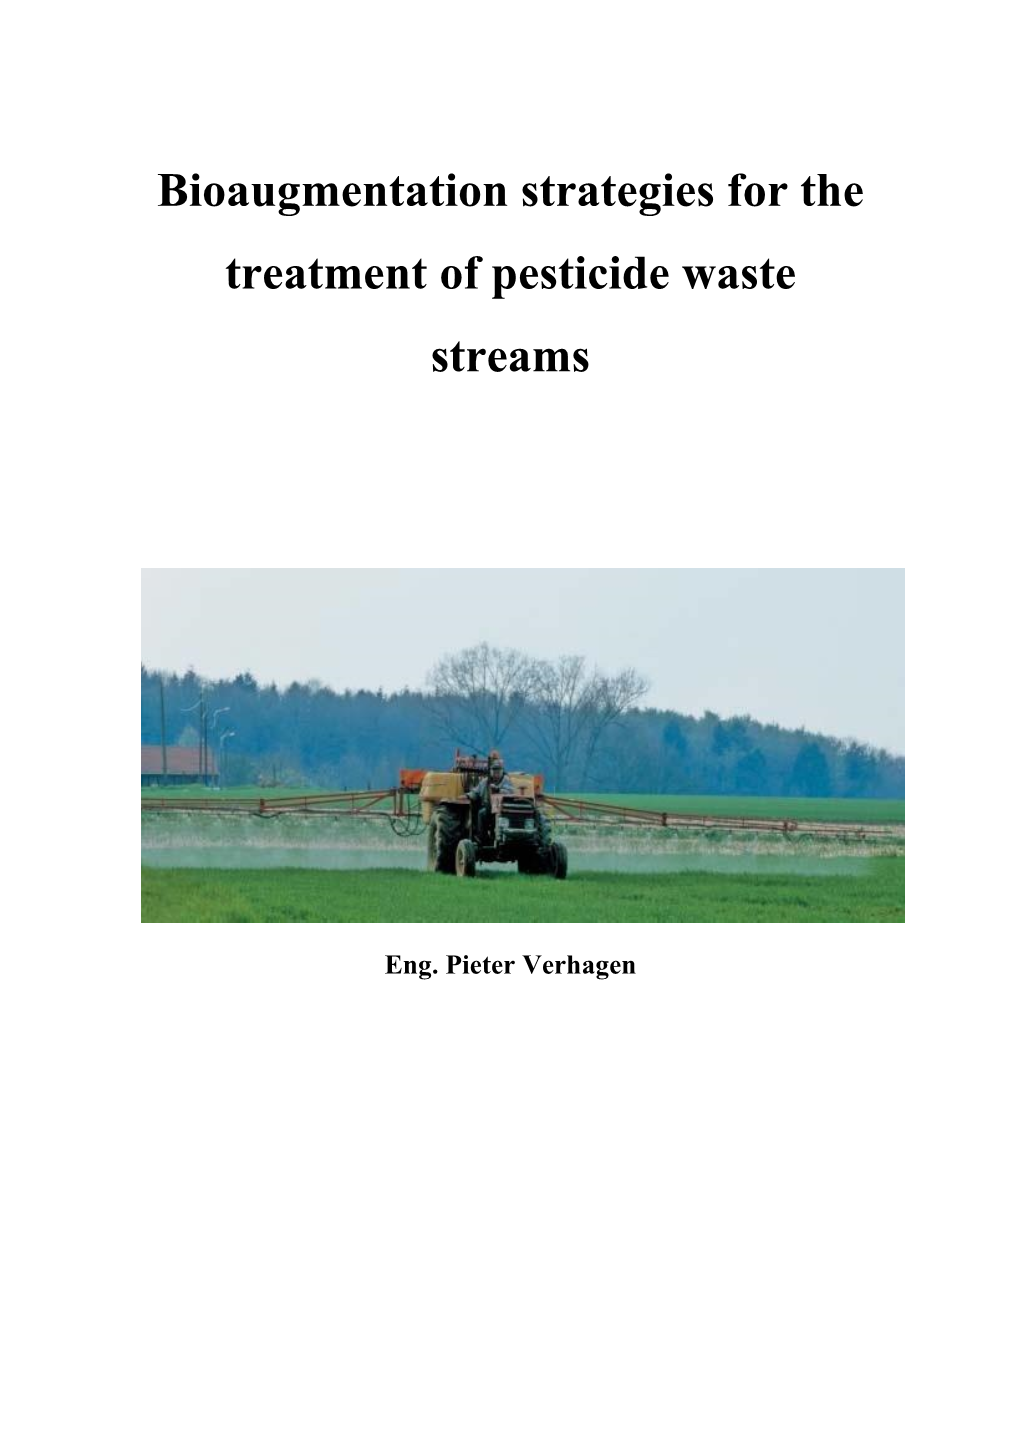 Bioaugmentation Strategies for the Treatment of Pesticide Waste Streams